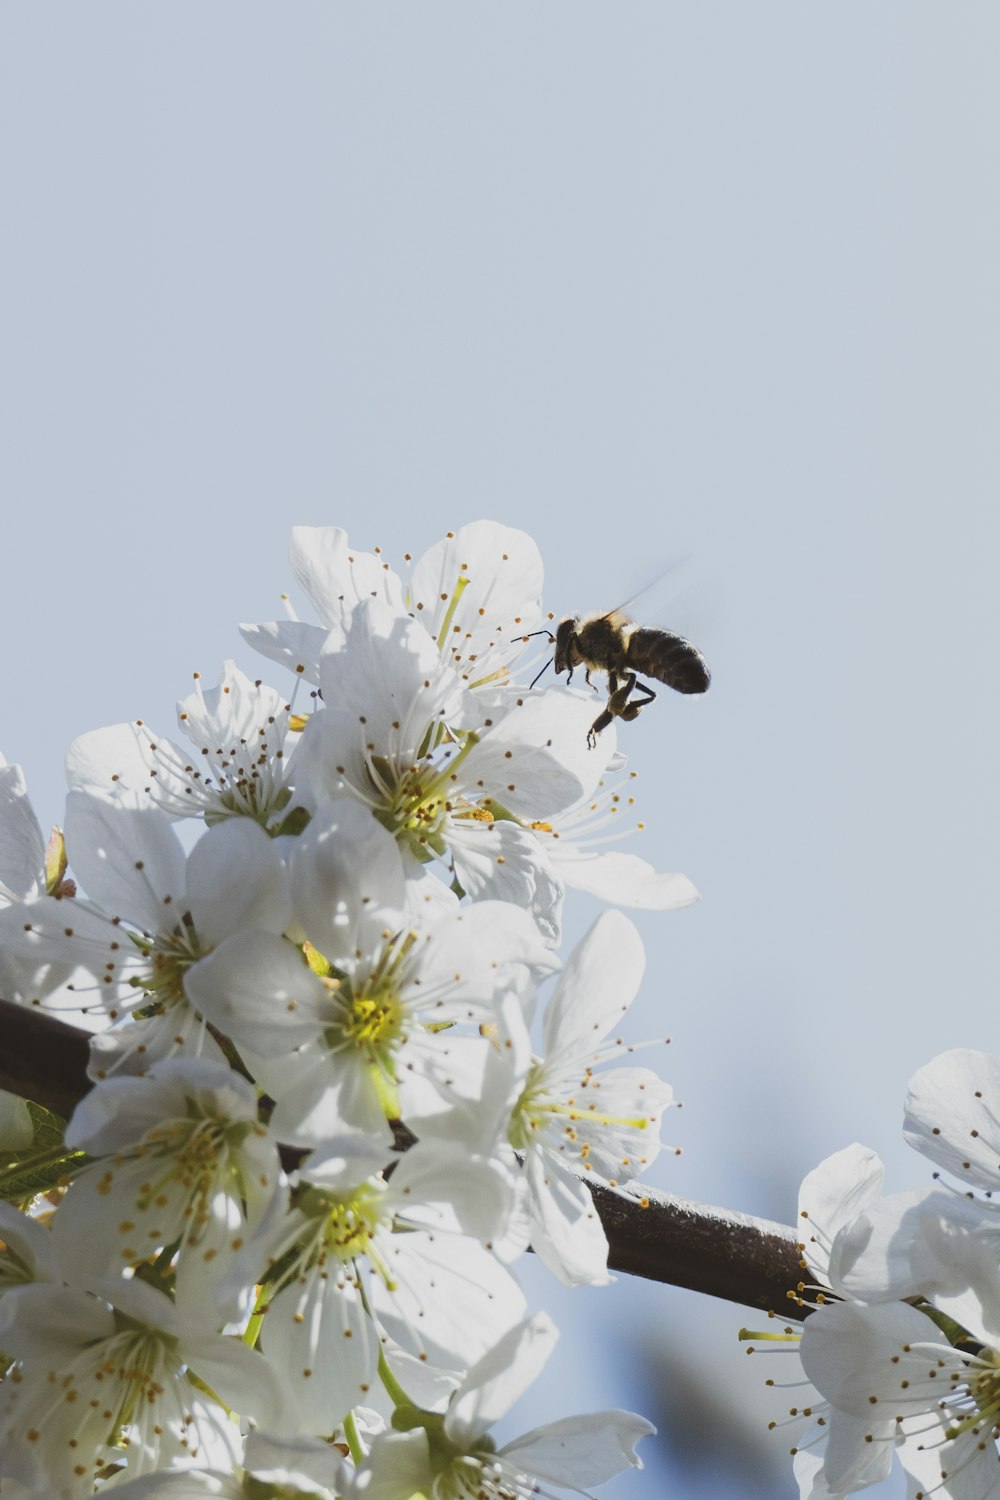 a bee flying over a white flowered tree